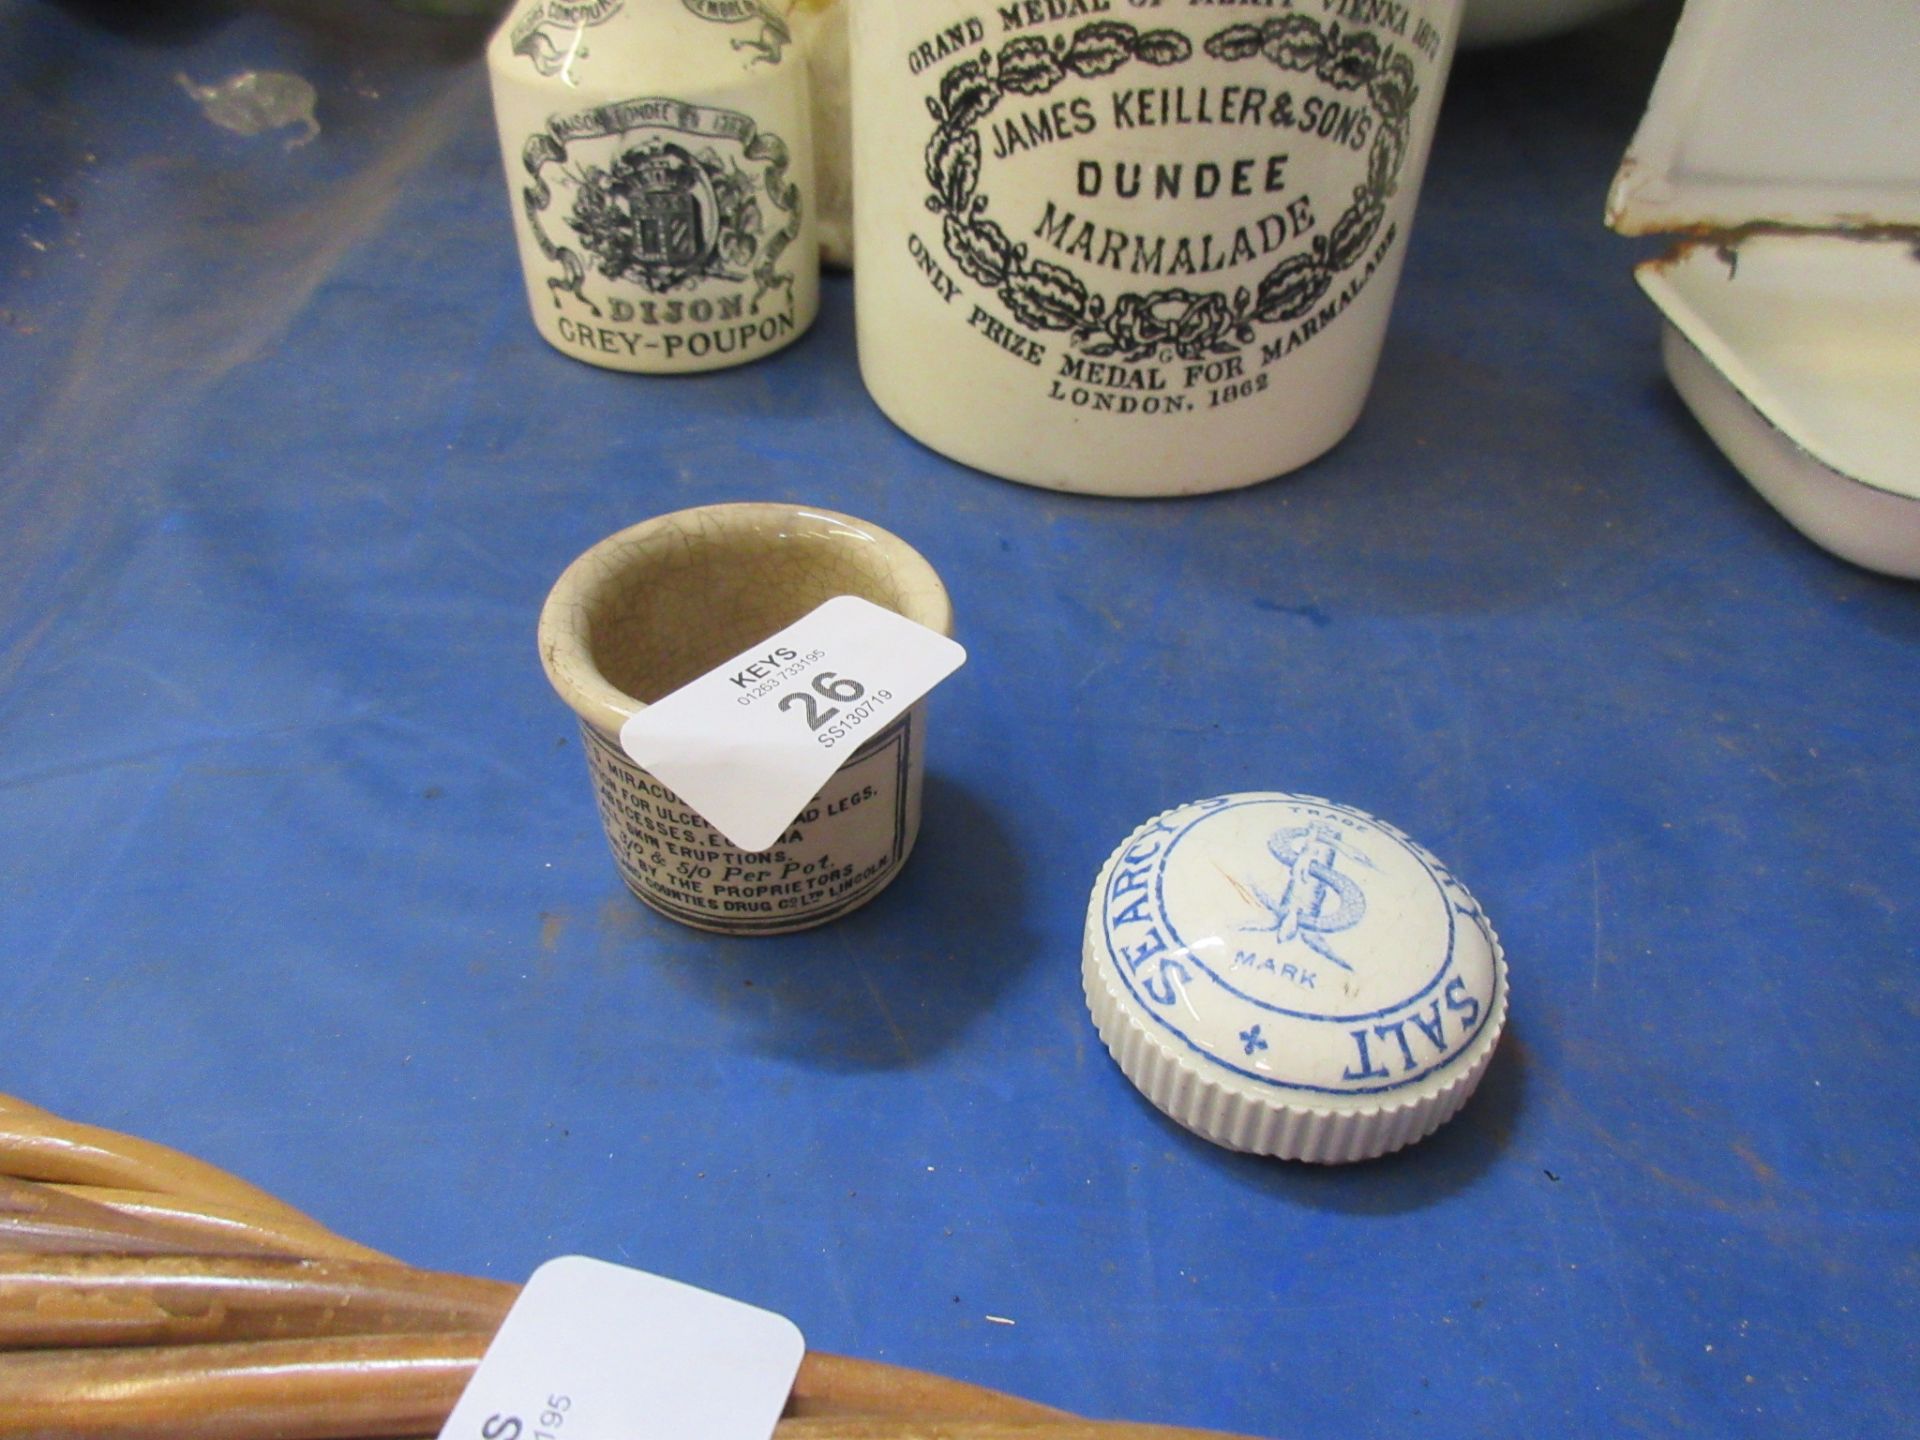 A transfer printed pot for Clarke’s miraculous salve, Together with a similar pot lid for Searcy’s